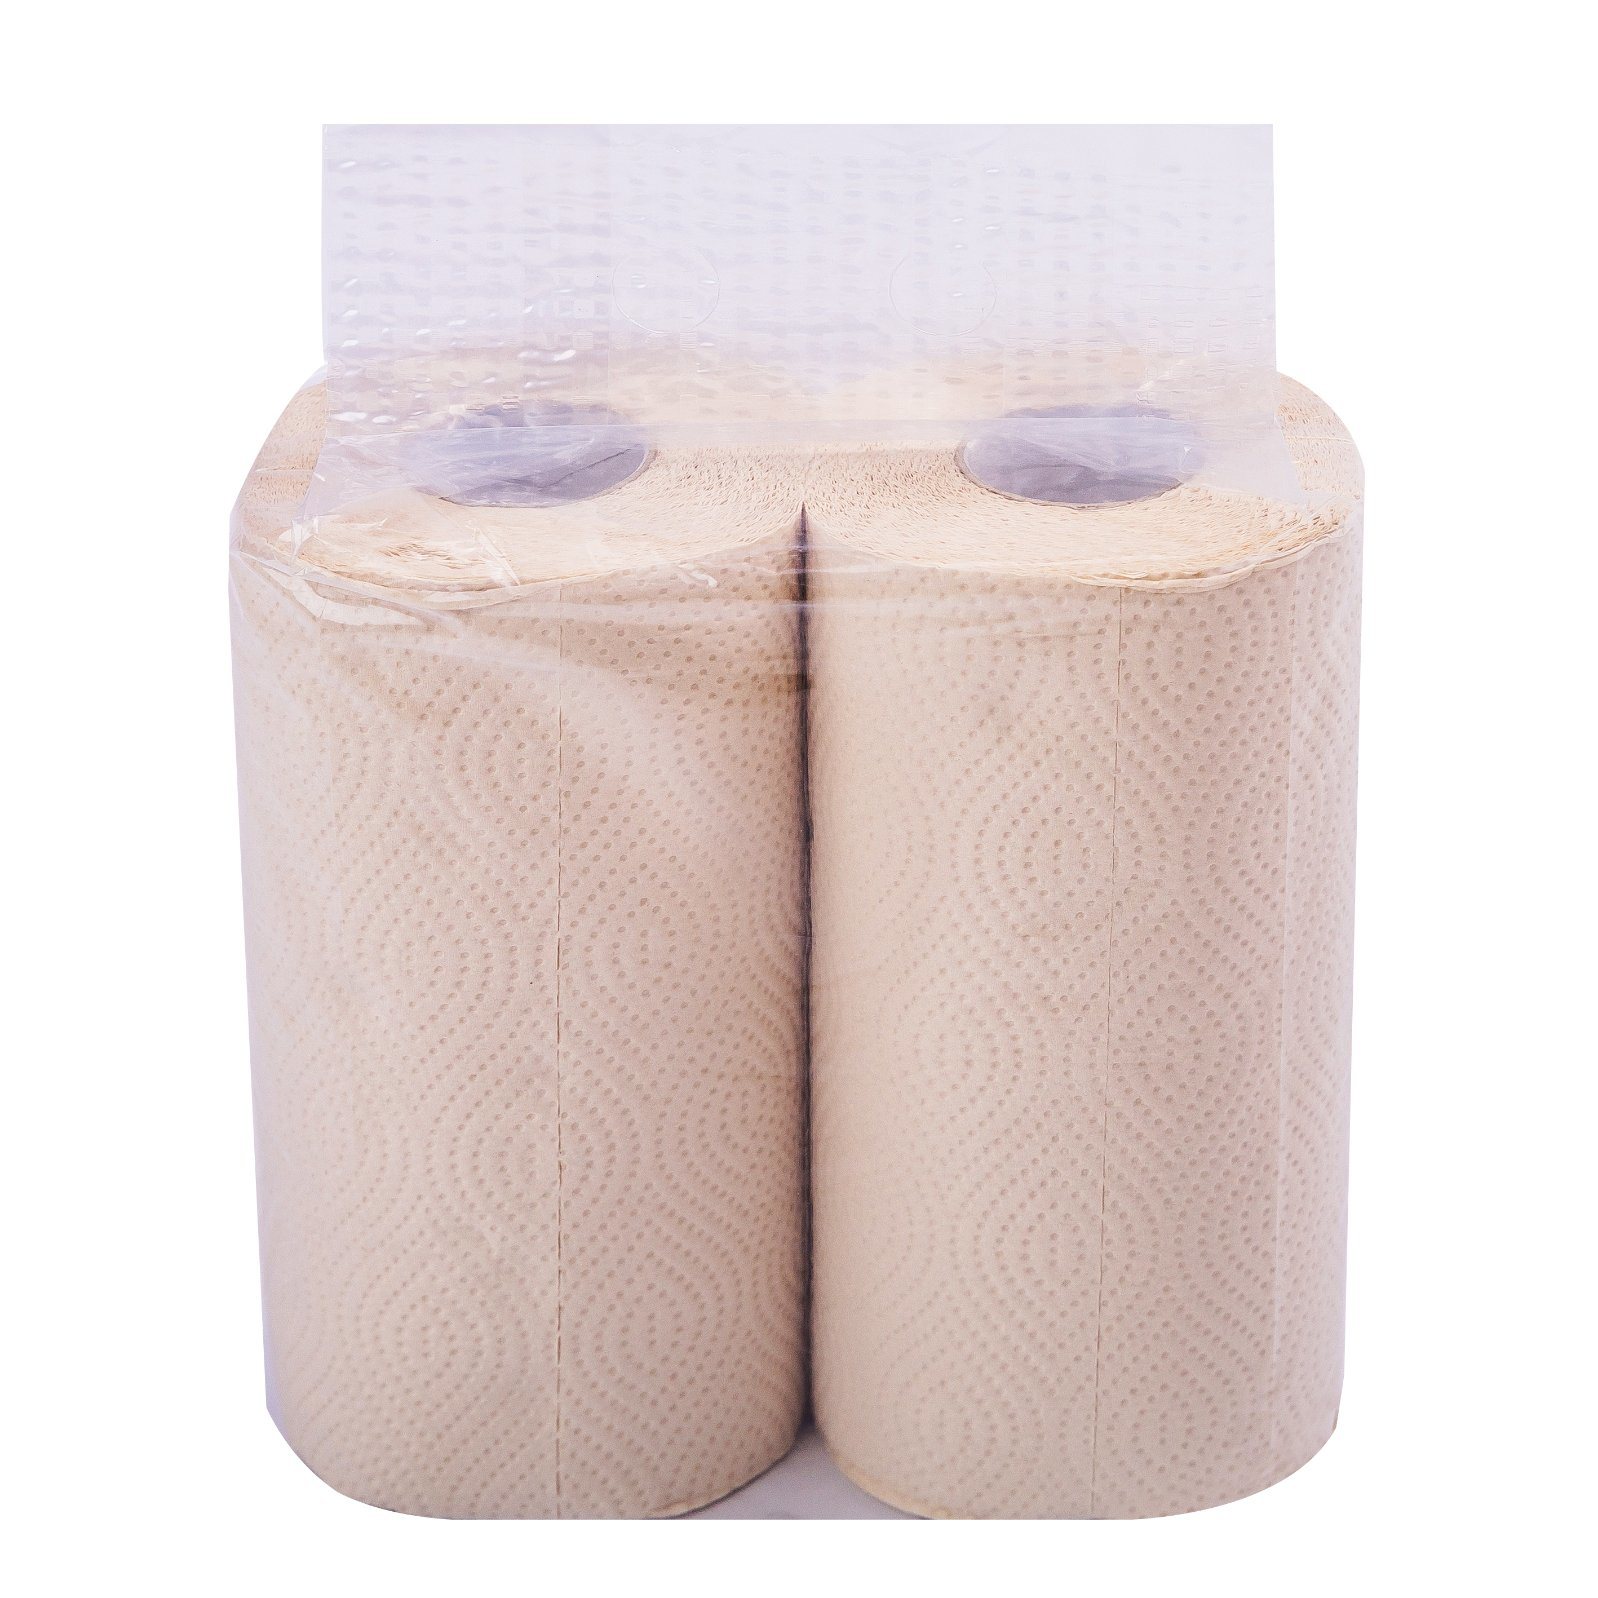 China manufacturer custom private label eco friendly unbleached bamboo kitchen paper hand towel